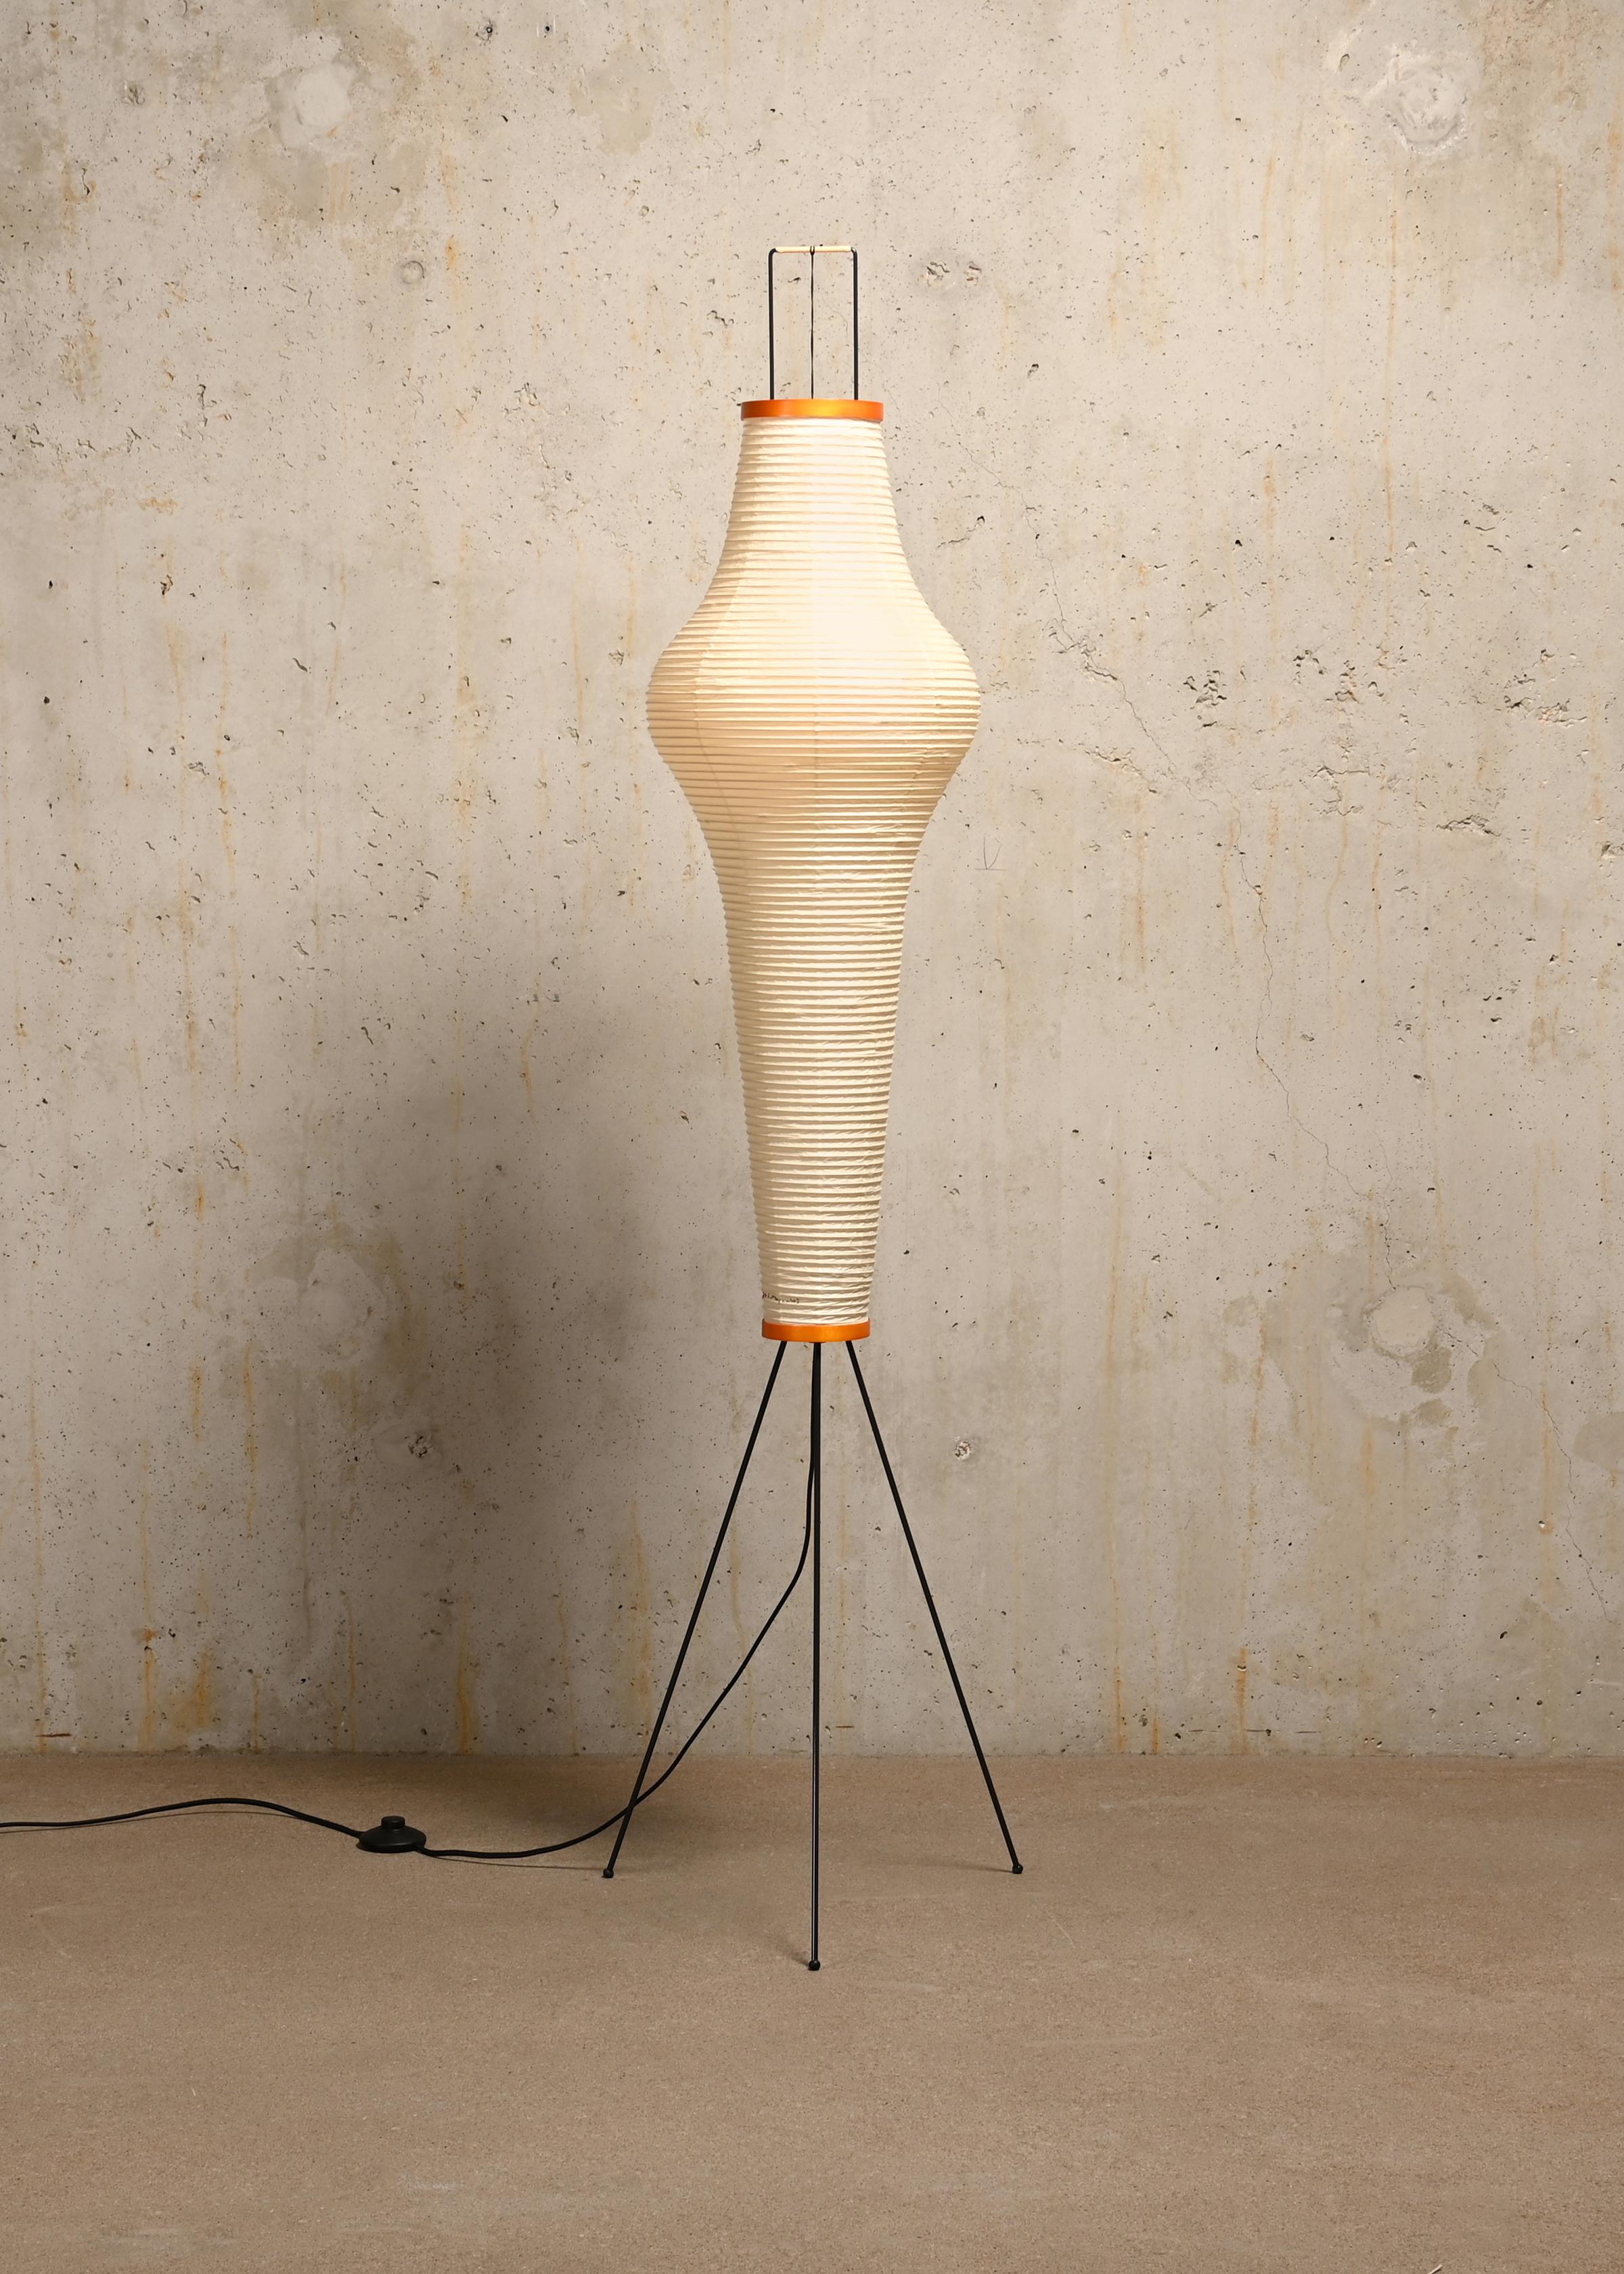 Wonderful Pair Akari light sculptures (Model 14A) by Isamu Noguchi handcrafted from traditional washi paper and bamboo. Each Akari Light Sculpture was meticulously crafted by hand in the Ozeki workshop, a traditional family-run company based in